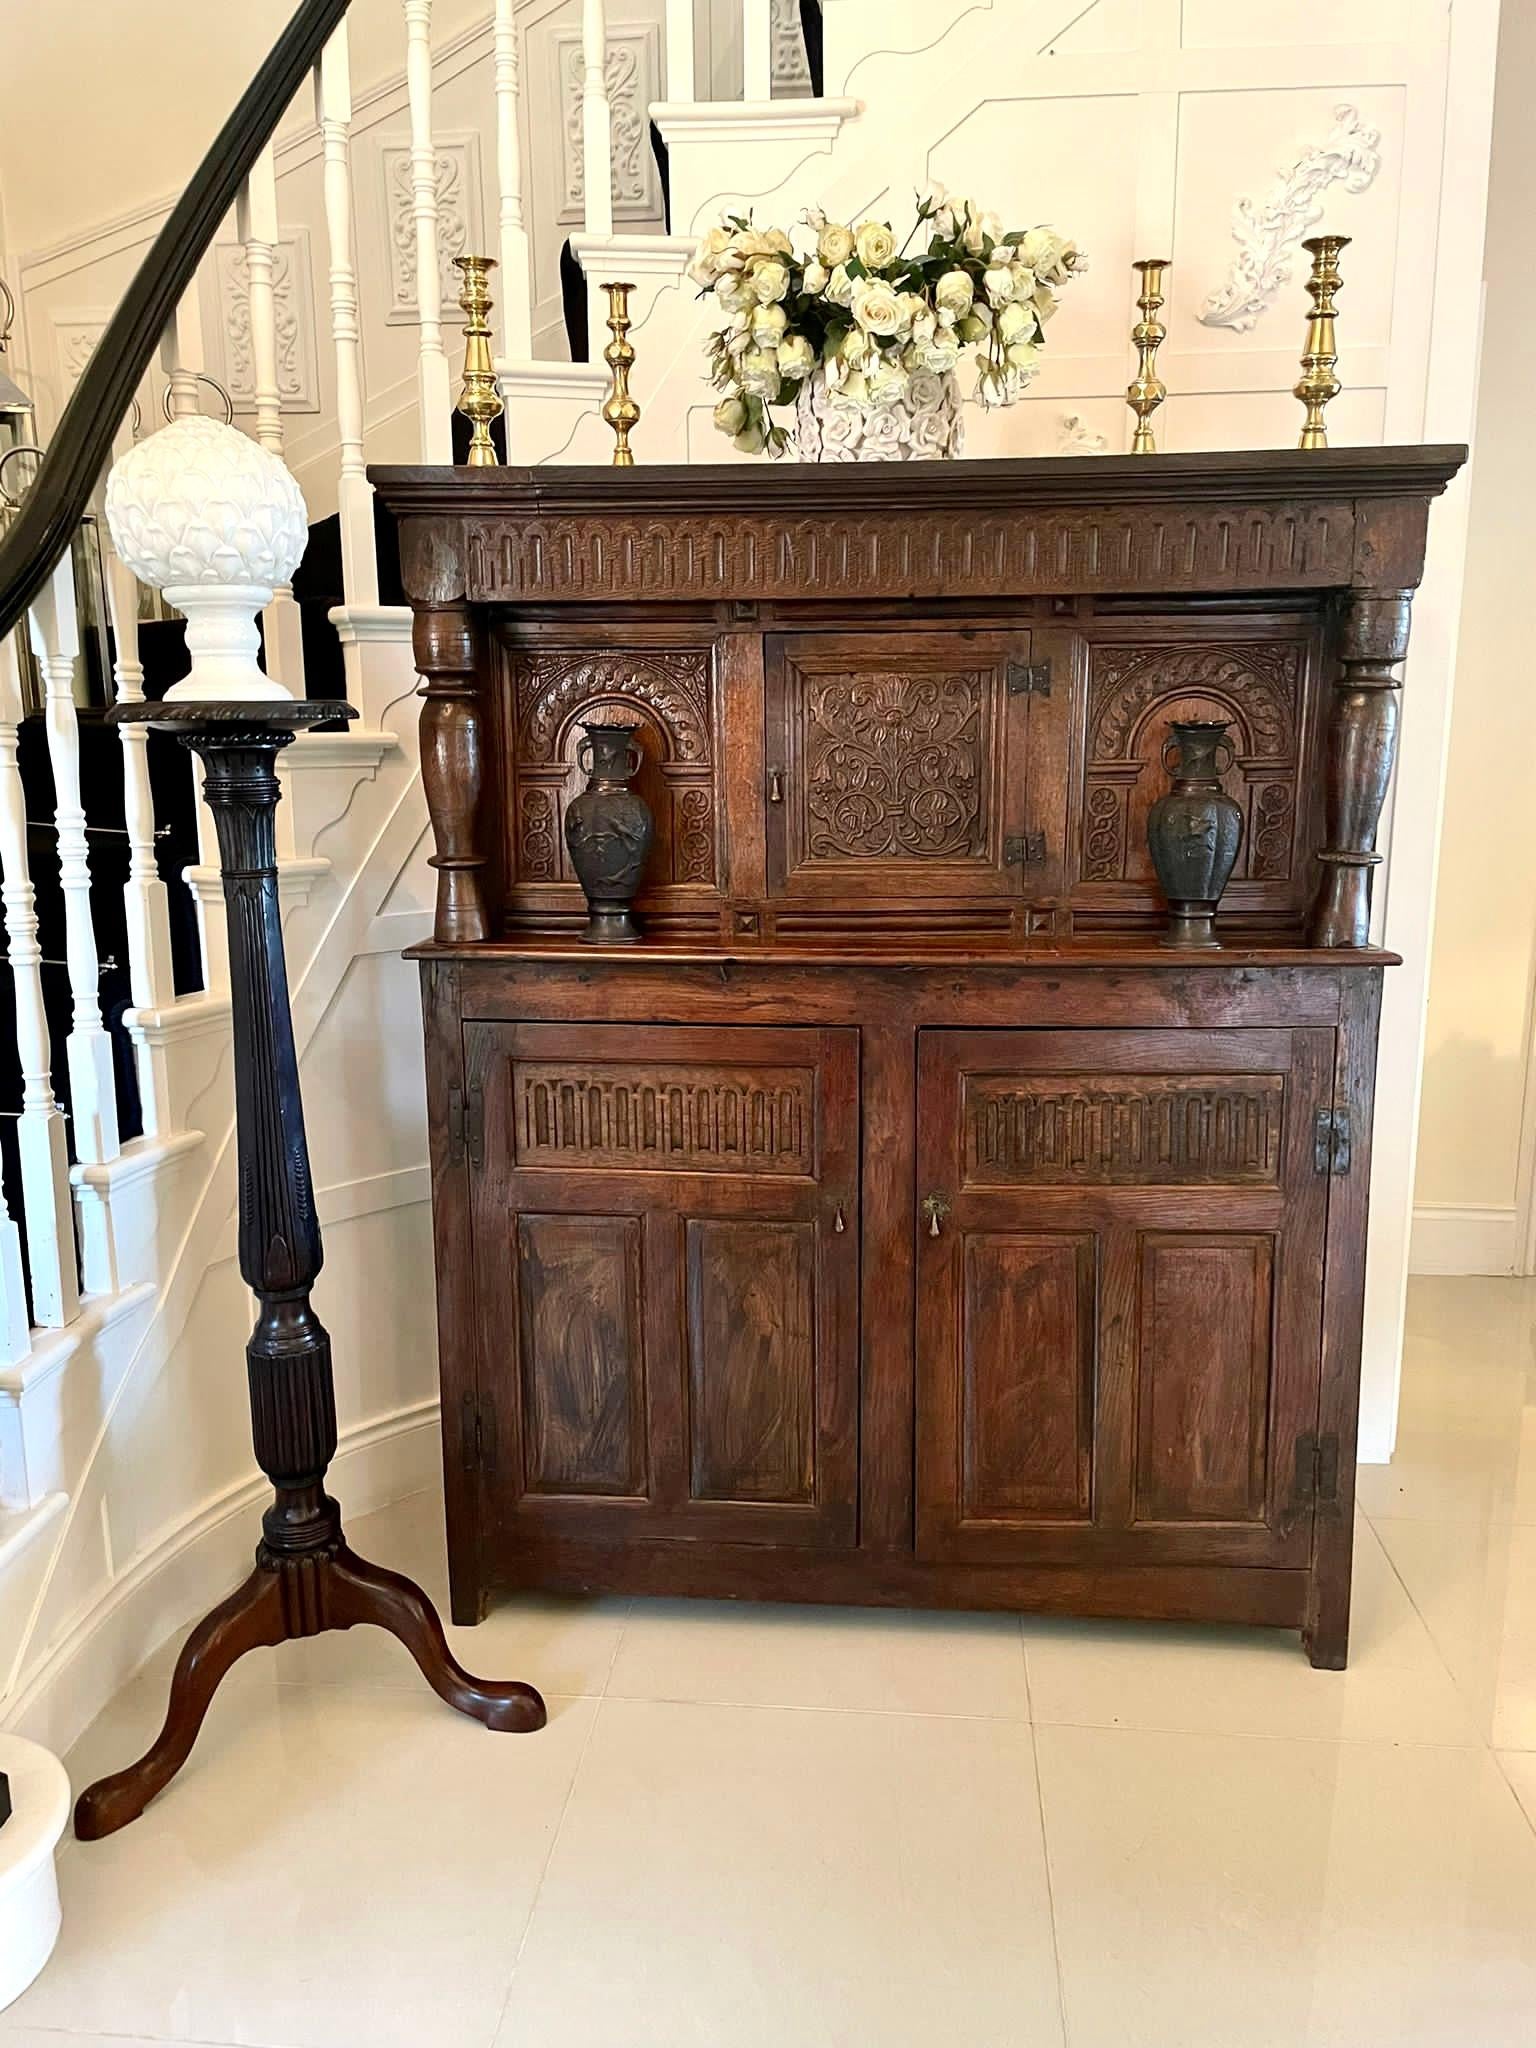 Antique 17th century antique carved oak court cupboard having a splendid shaped cornice, carved oak frieze above a quality carved centre door with iron hinges flanked by two carved panels and a pair of turned oak columns. The base boasts a pair of